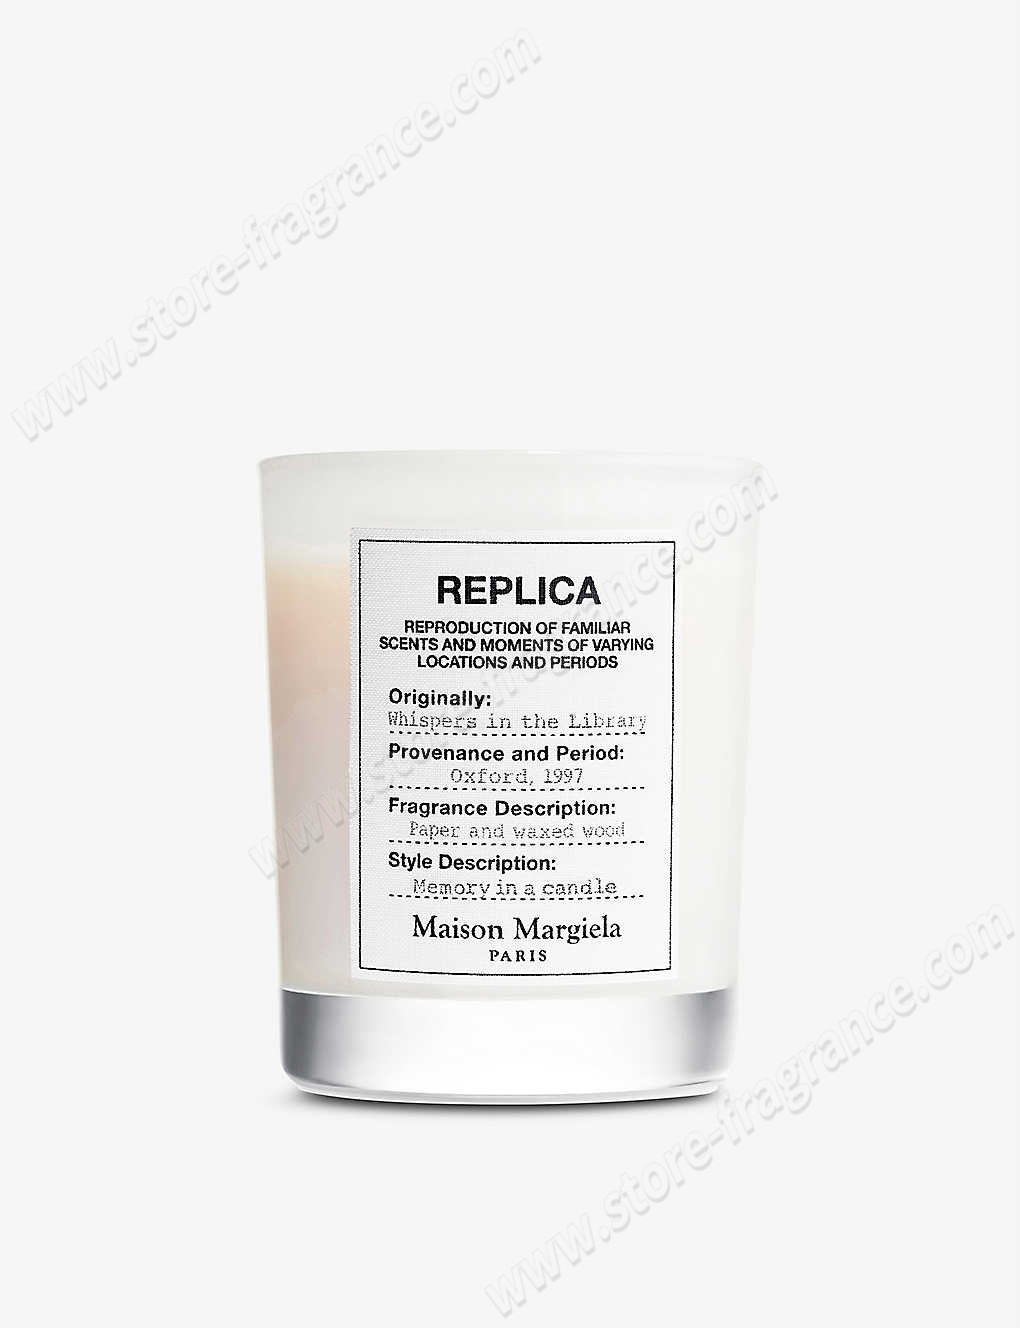 MAISON MARGIELA/Replica Whispers in the Library scented candle 165g ✿ Discount Store - MAISON MARGIELA/Replica Whispers in the Library scented candle 165g ✿ Discount Store